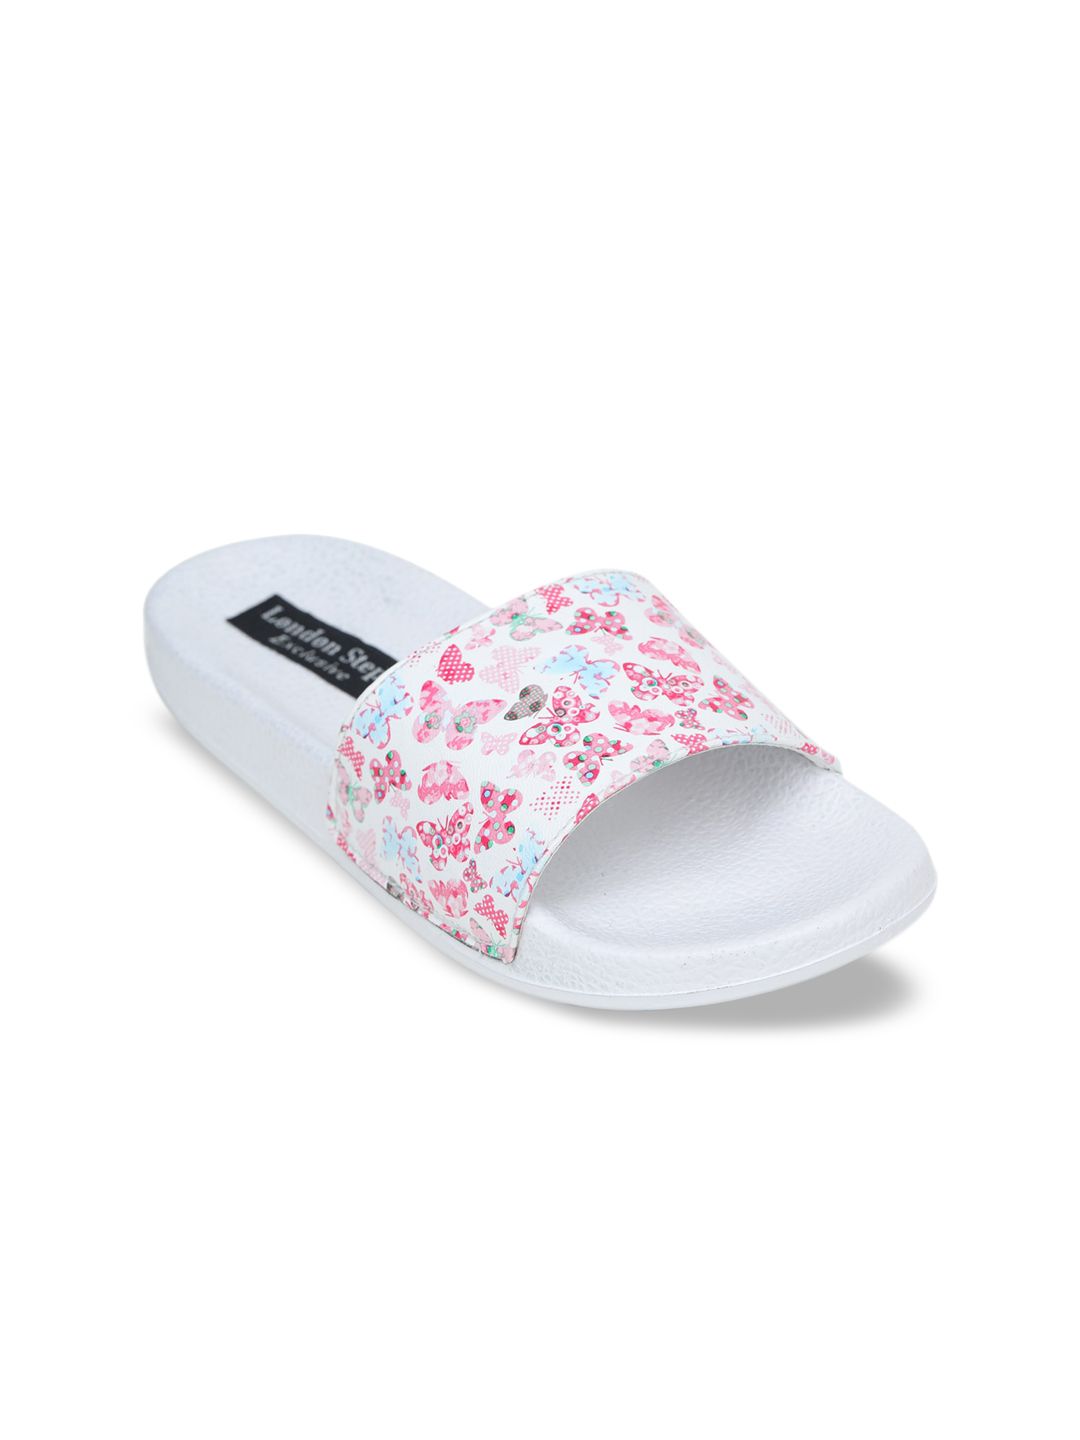 LONDON STEPS Women Pink & White Printed Sliders Price in India